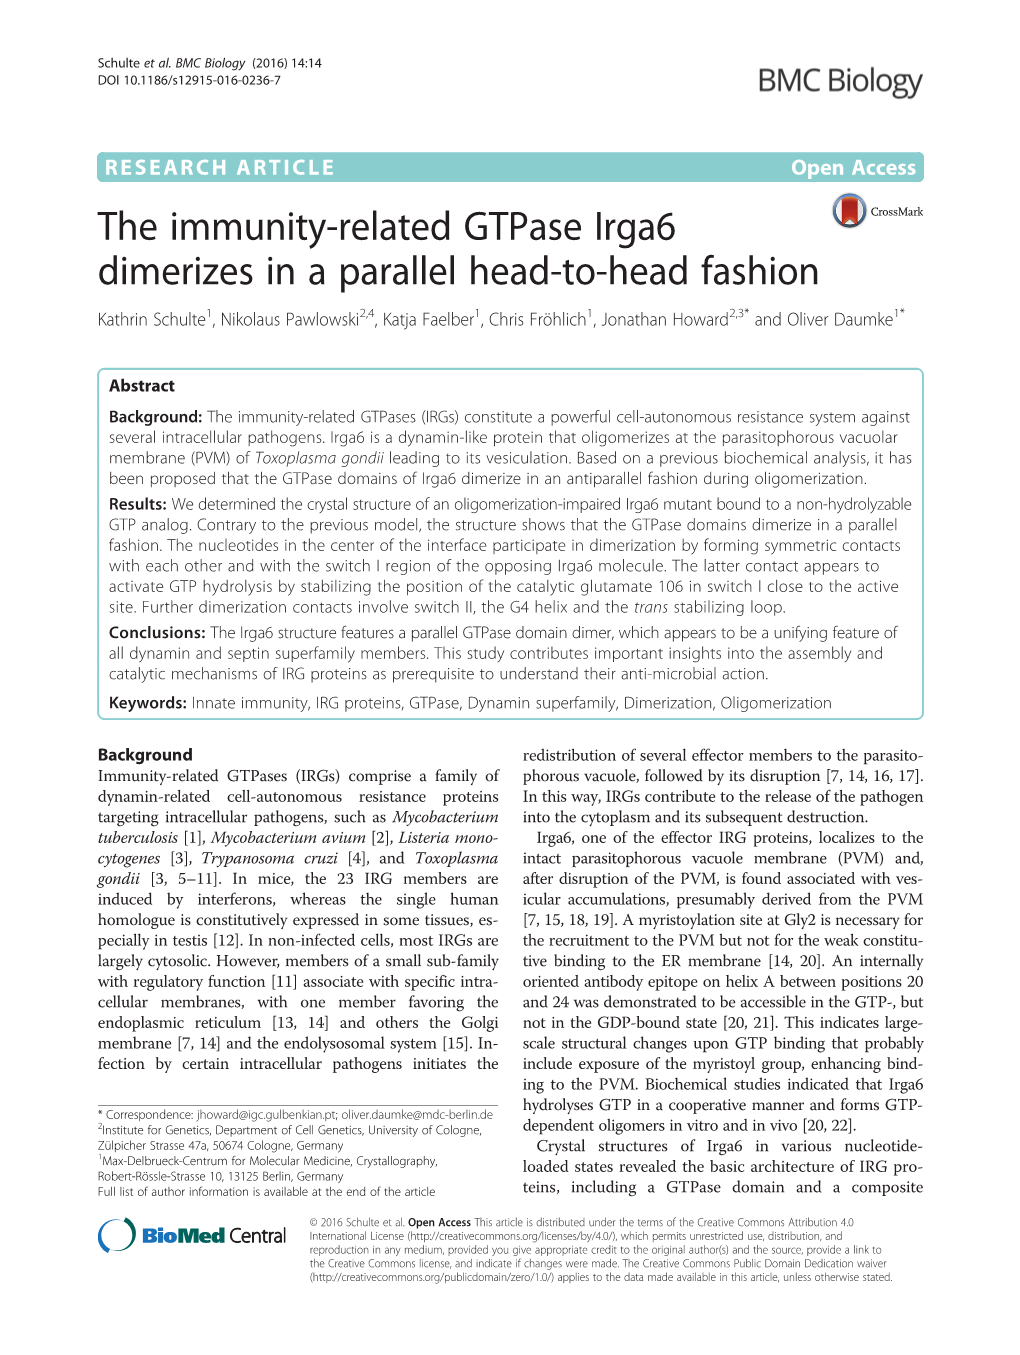 The Immunity-Related Gtpase Irga6 Dimerizes in a Parallel Head-To